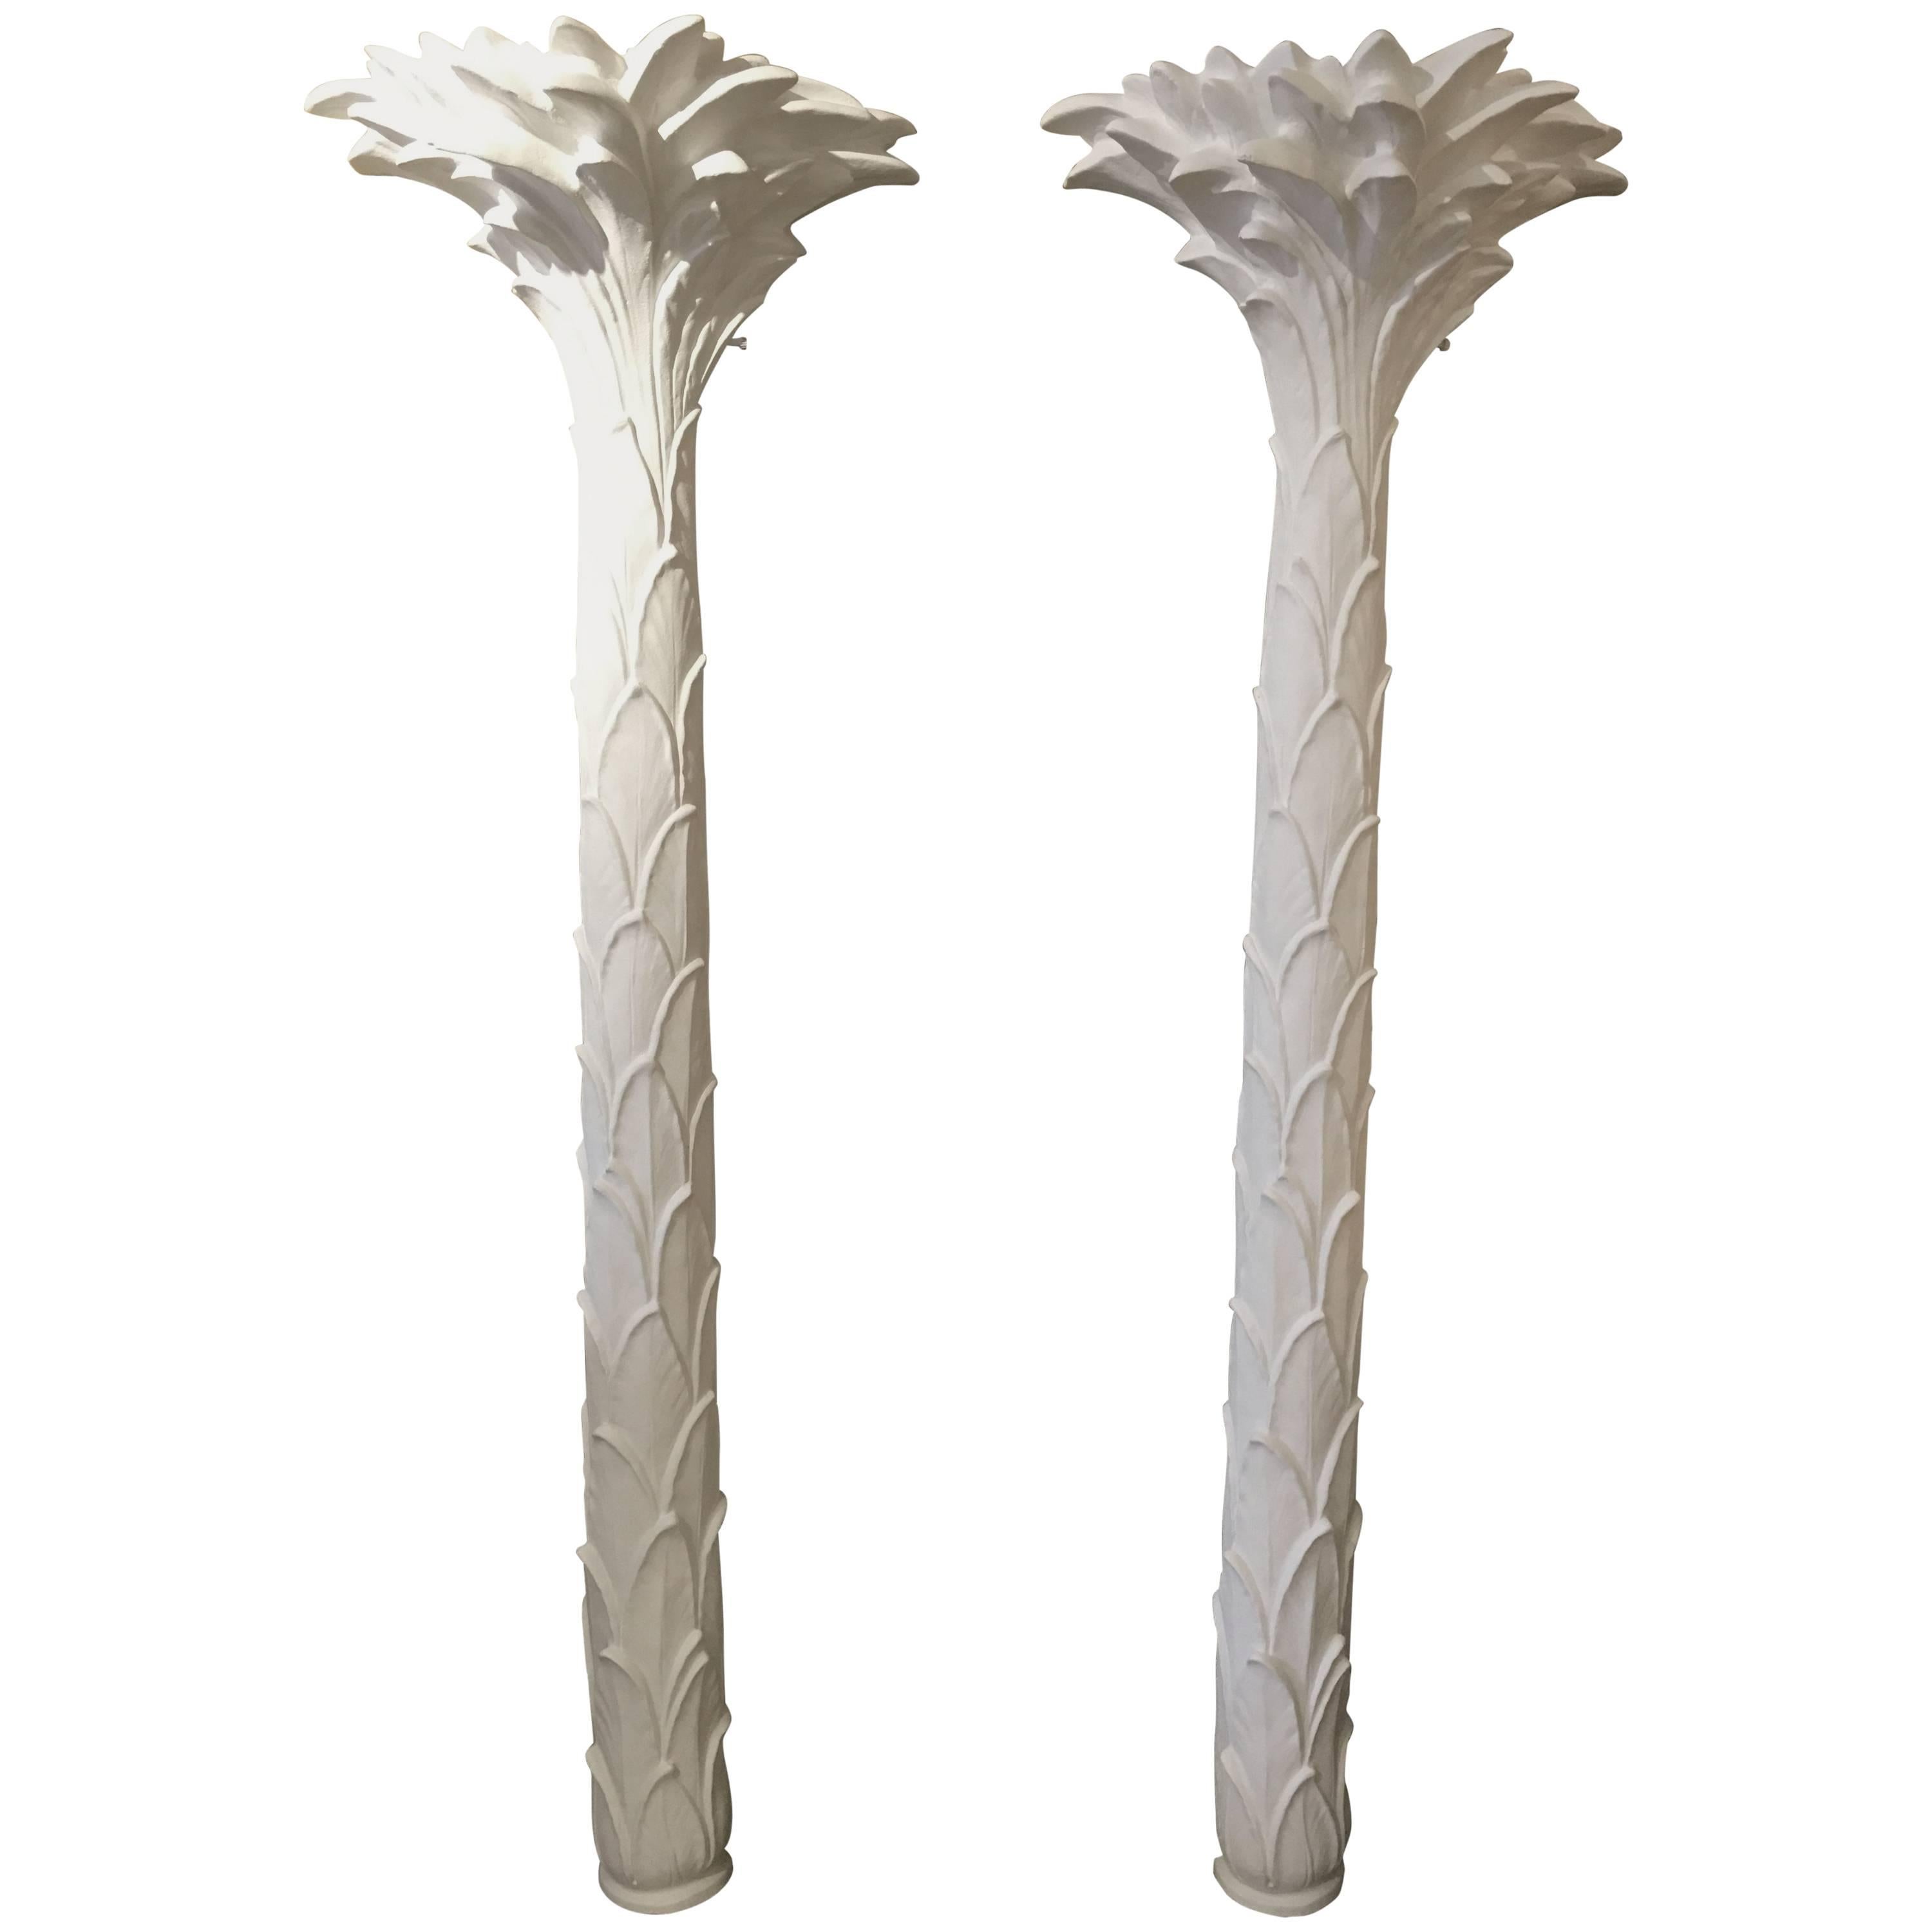 Sirmos Pair of Plaster Palm Tree Torchiere Uplights, Serge Roche Style